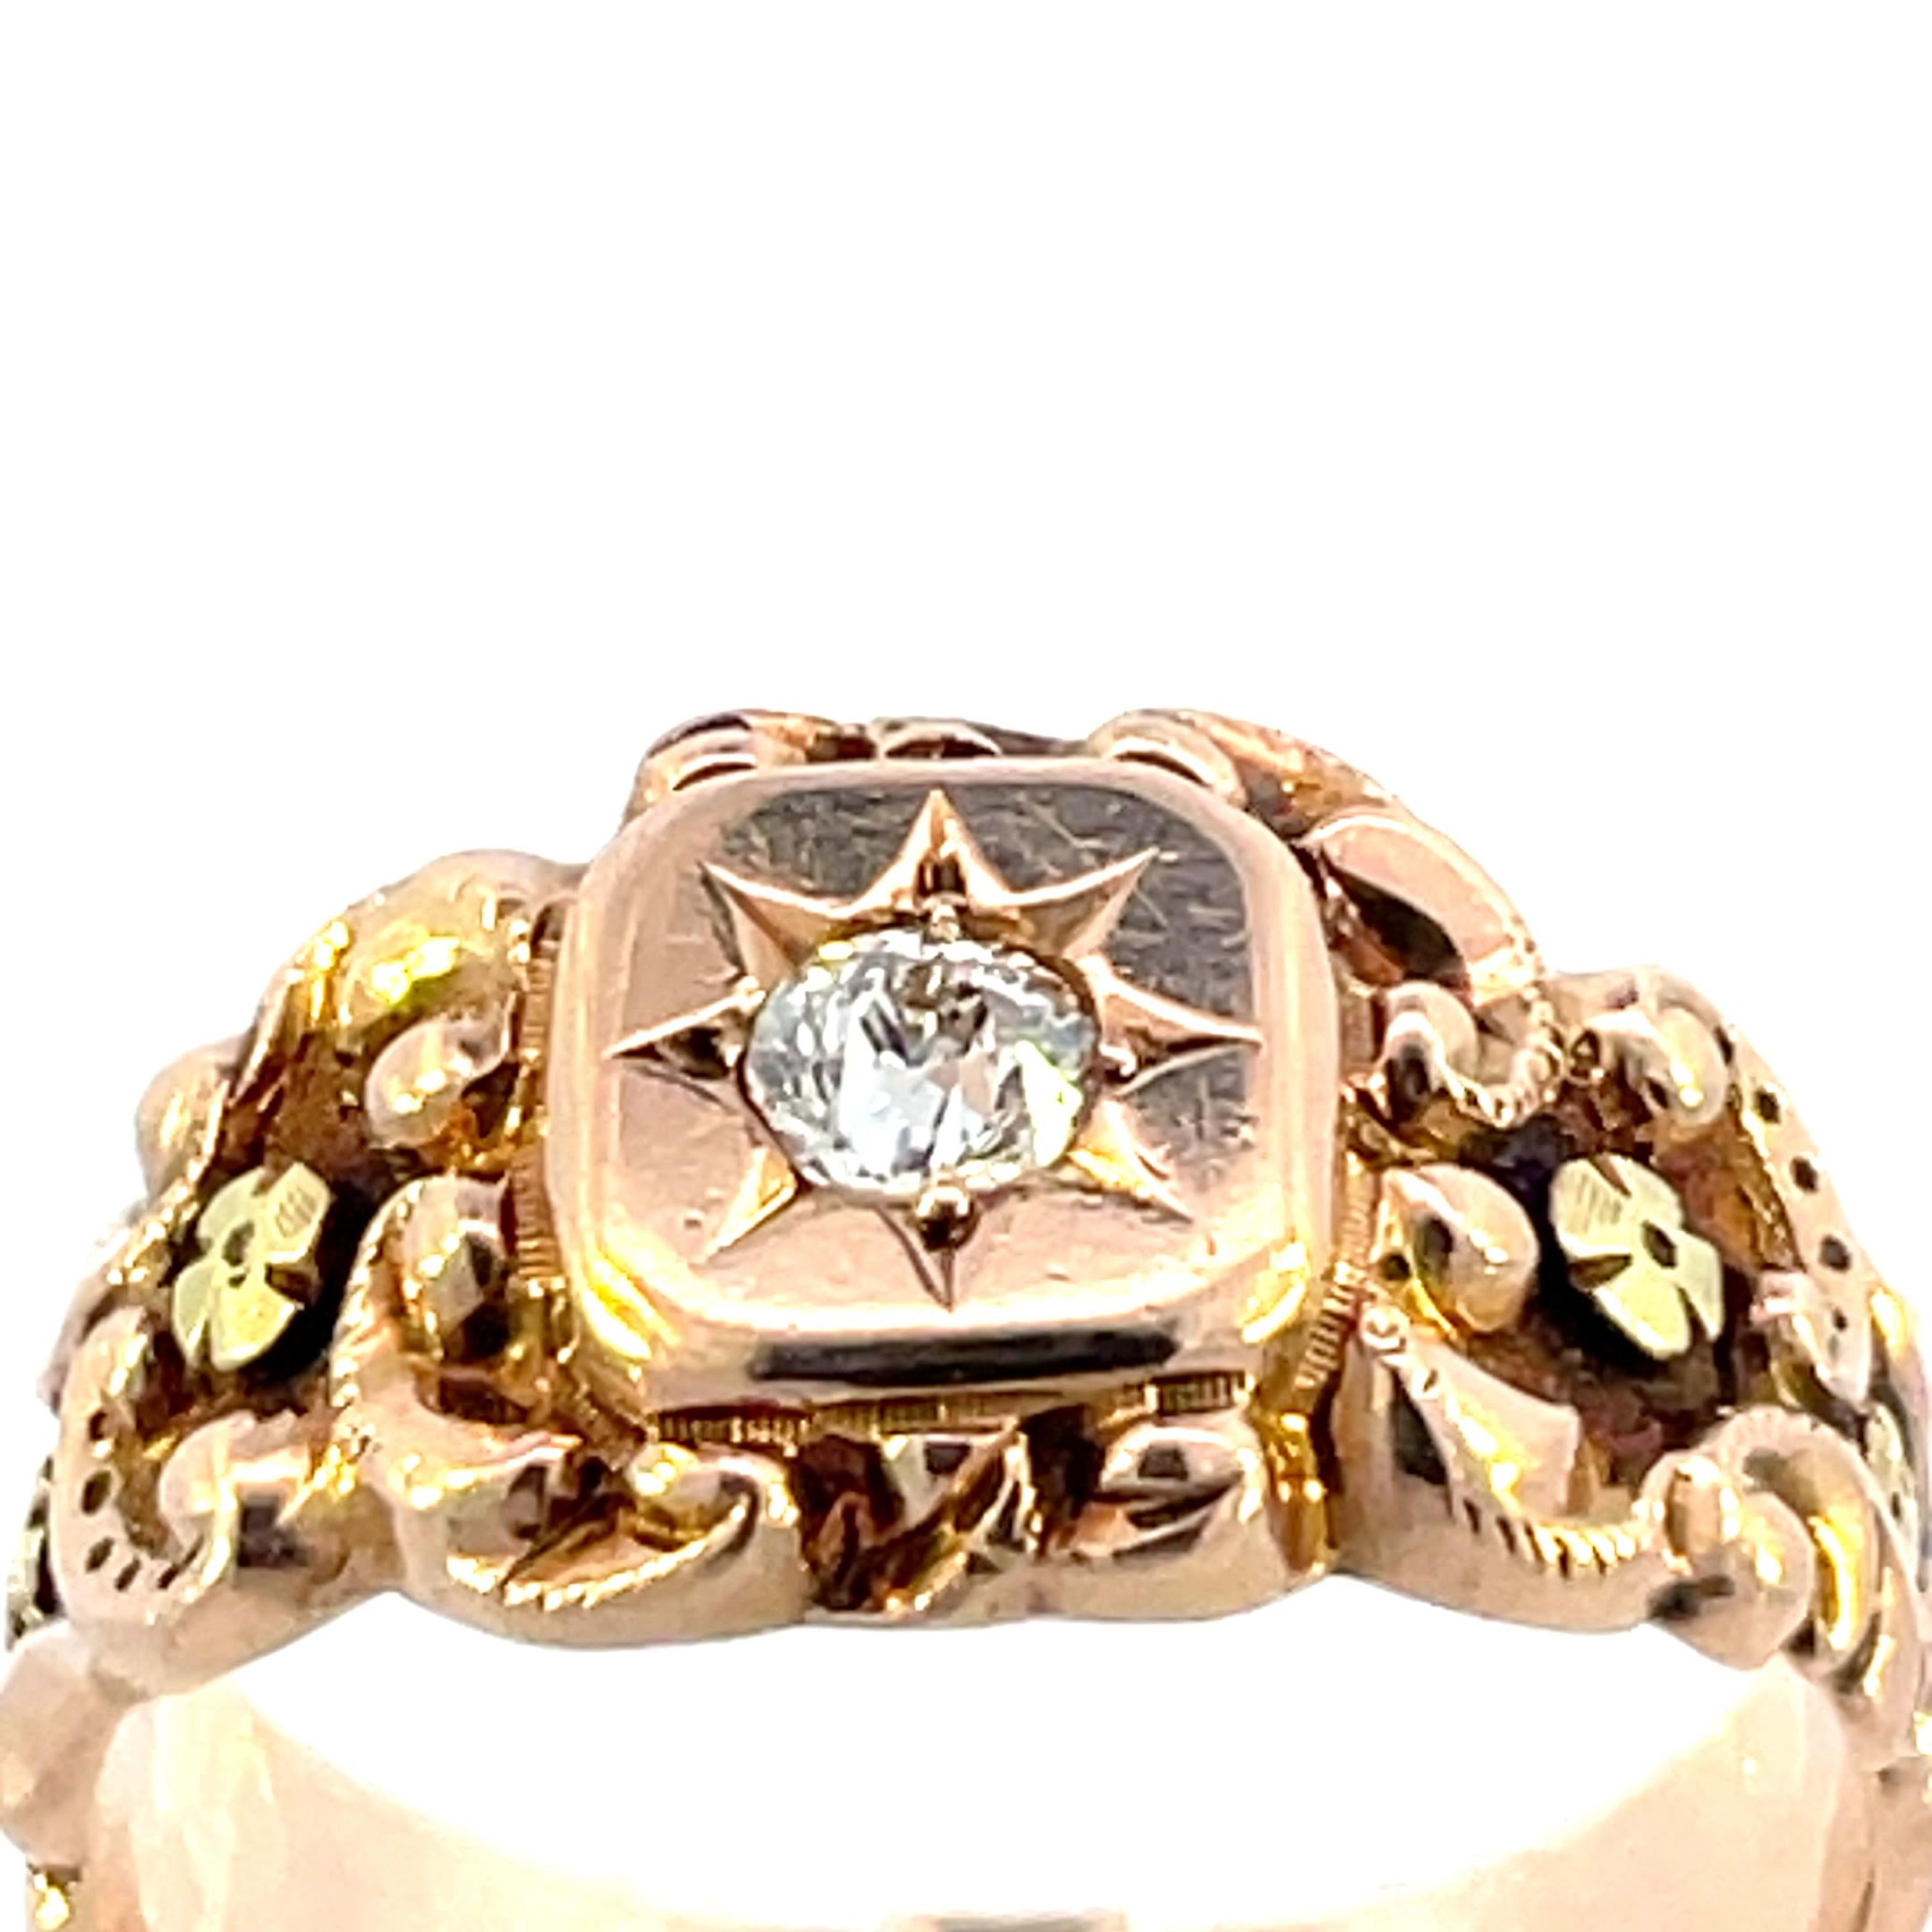 A magnificent 1880 14K Rose Gold Victorian Ring & Applied Green Gold Florets with a Beautifully Cut European Diamond that is unlike any other. The center of the ring features a vs2 in clarity H color European Cut diamond. It is a true representation